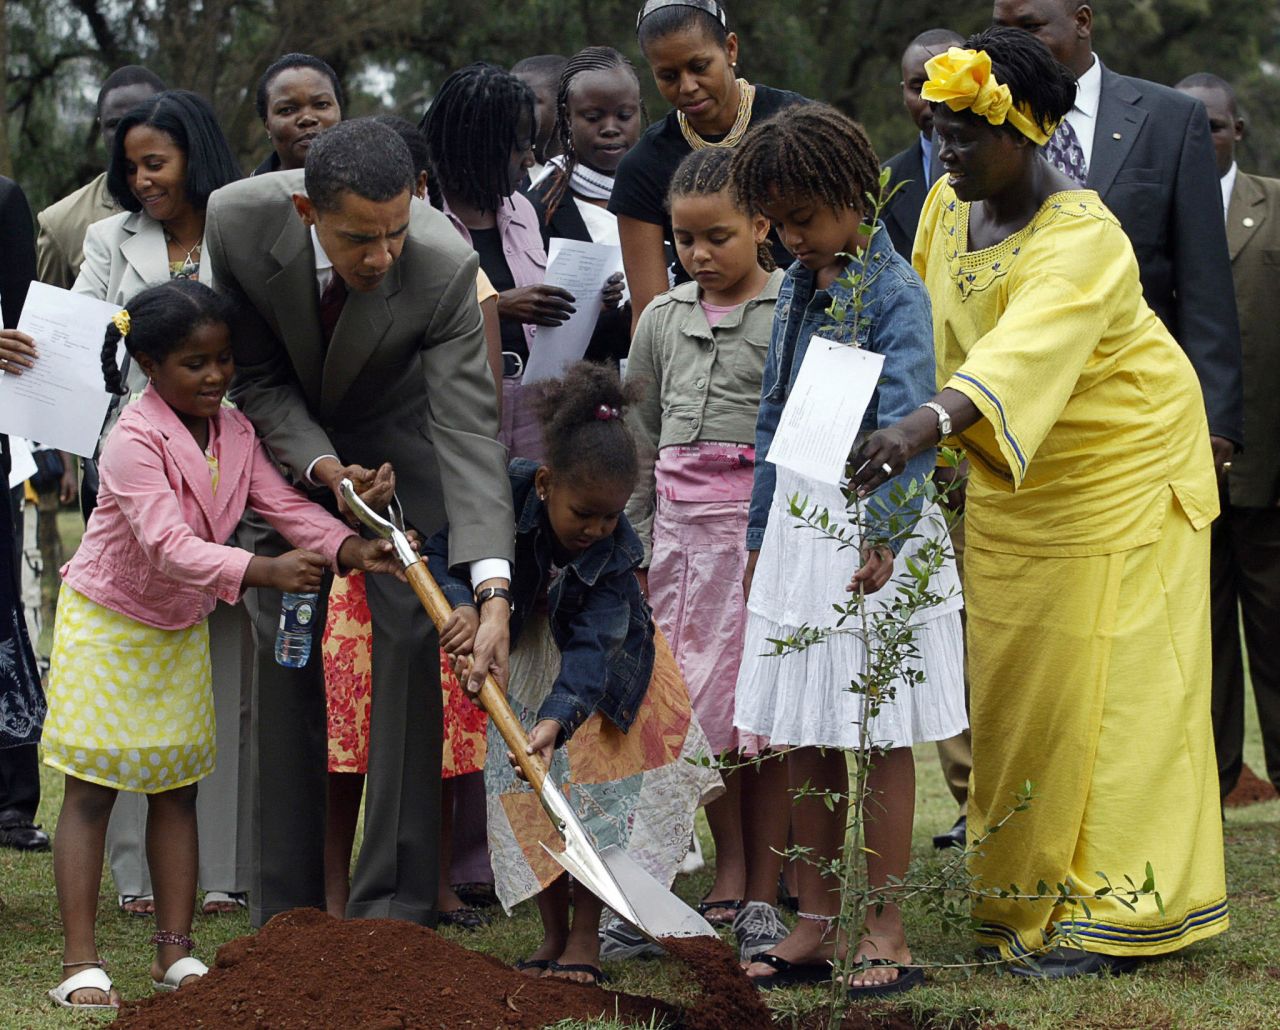 Wangari Maathai plants a tree in Nairobi 2006 with the visiting --then Senator for the state of Illinois -- Barack Obama.